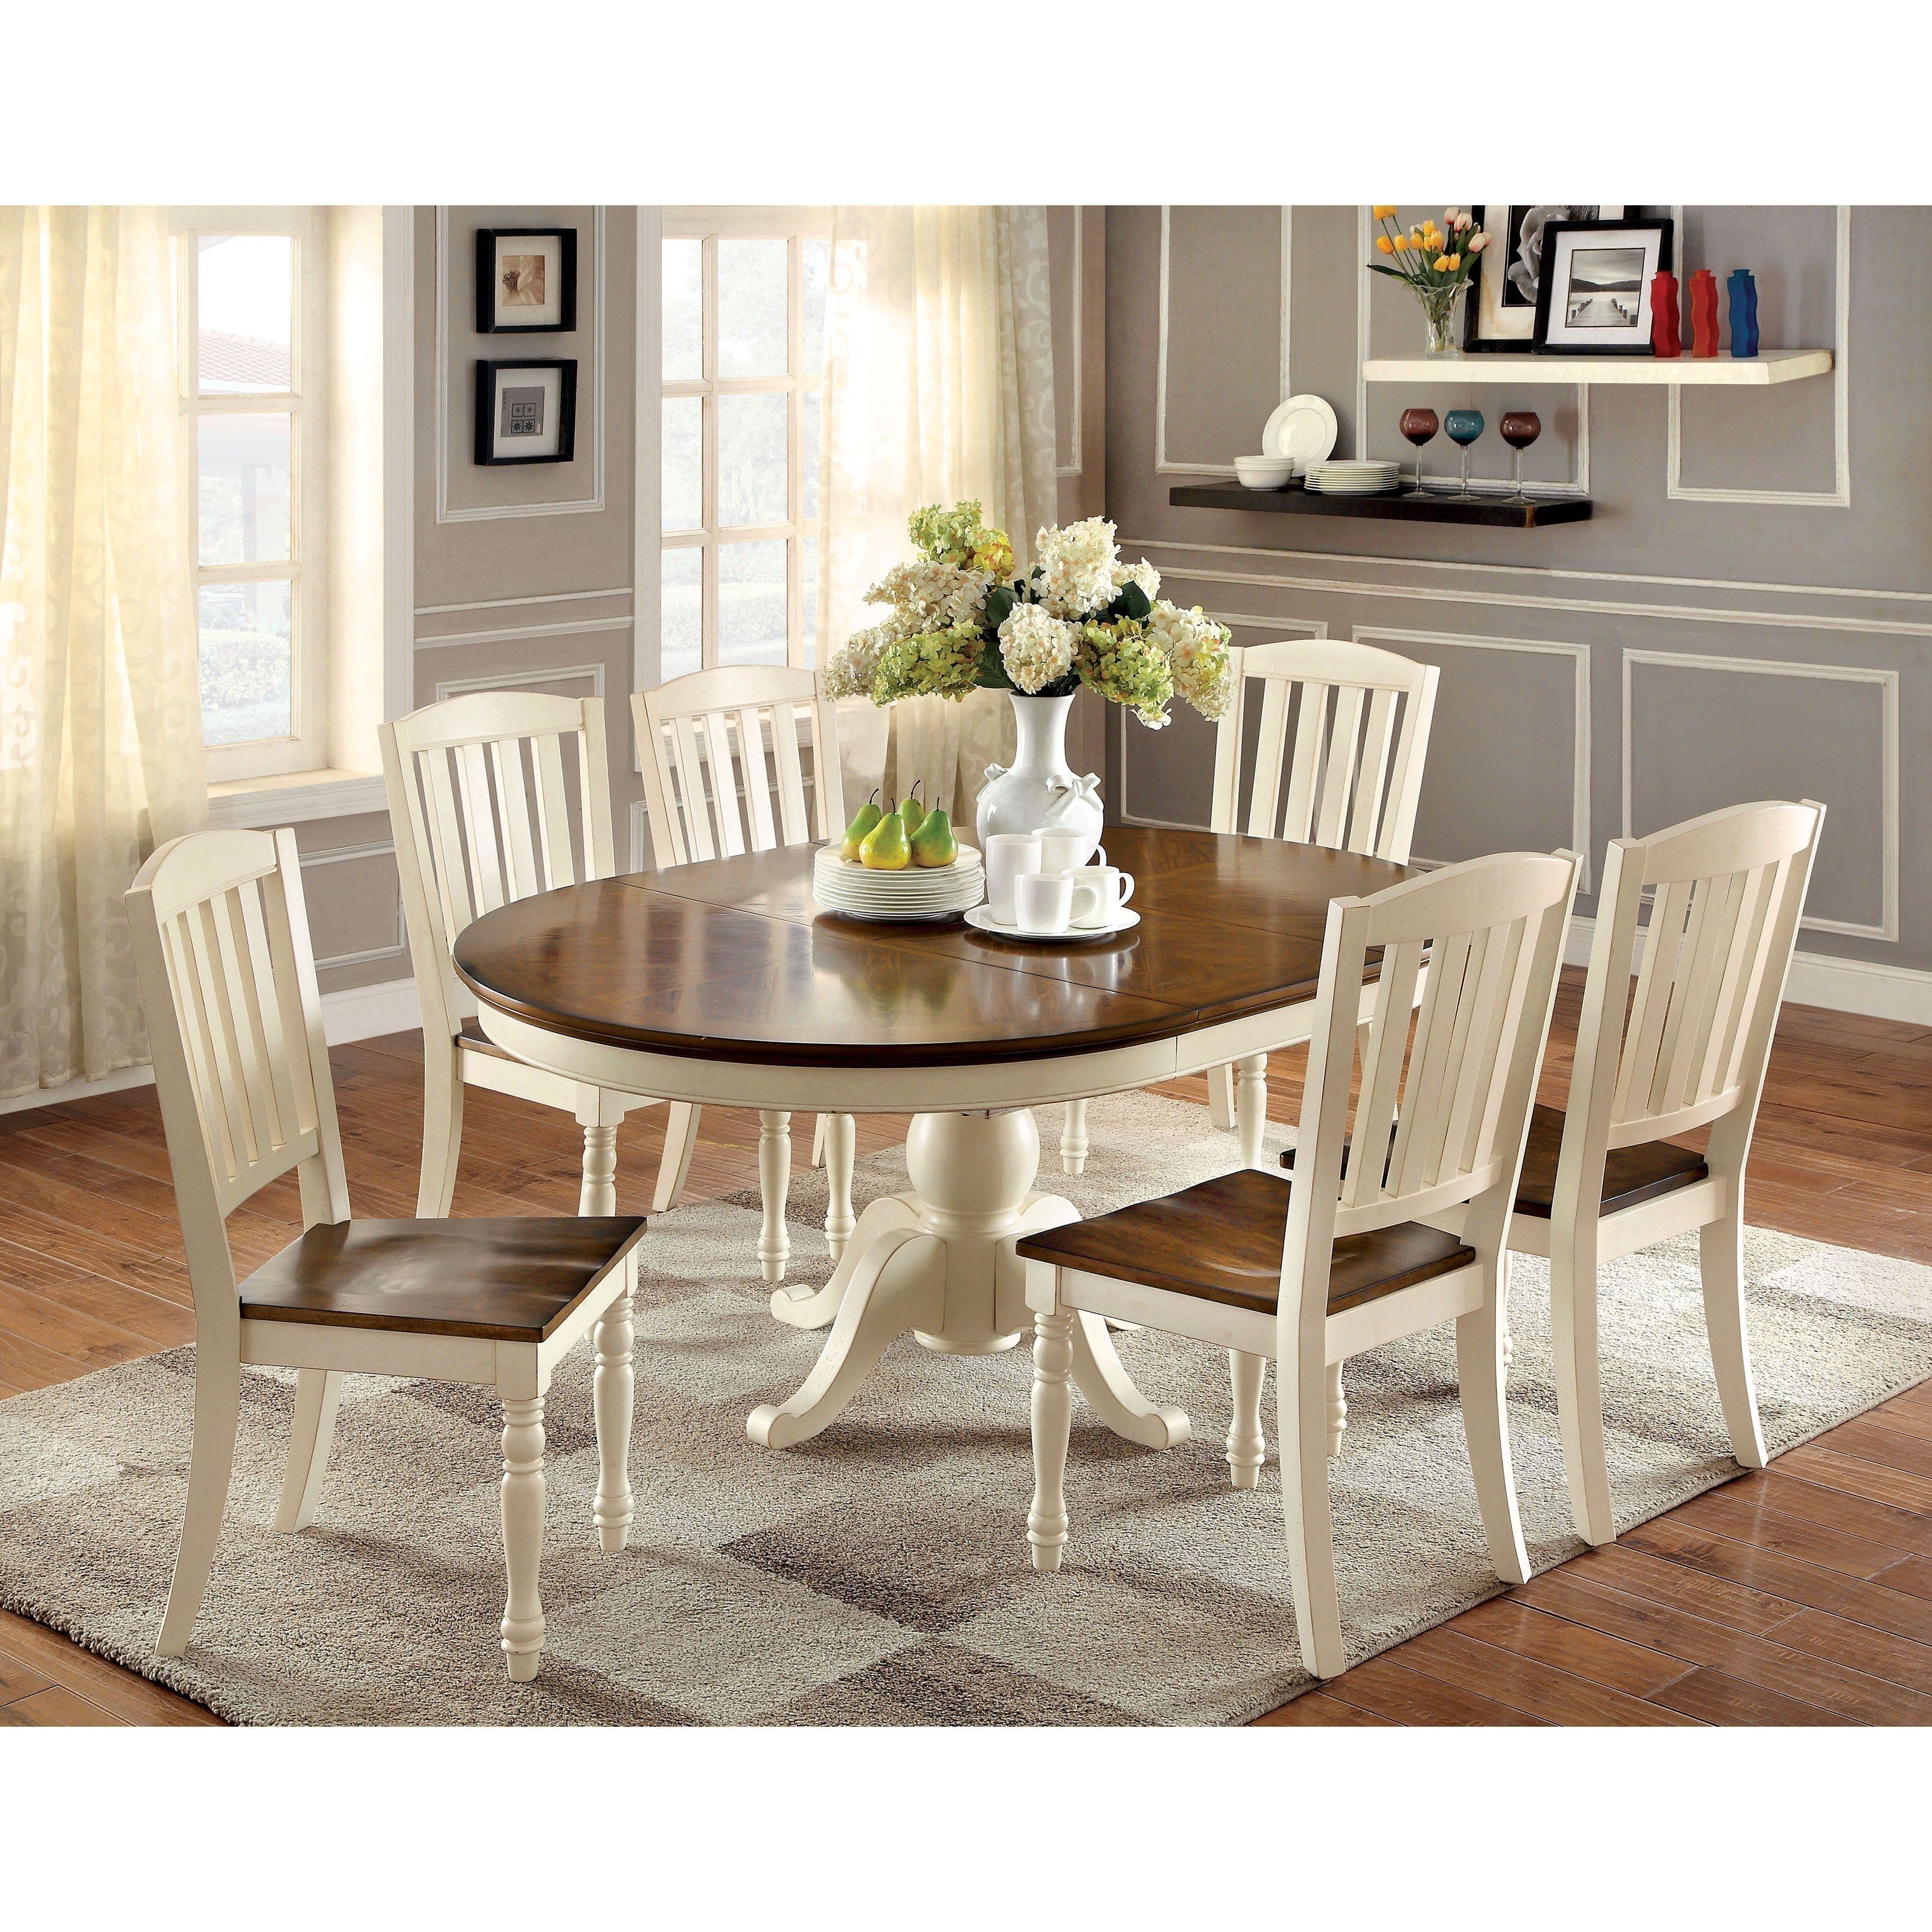 Round Dining Room Table Awesome Dining Room Table White Dining Table Pertaining To Most Recently Released Round Extendable Dining Tables And Chairs (View 23 of 25)